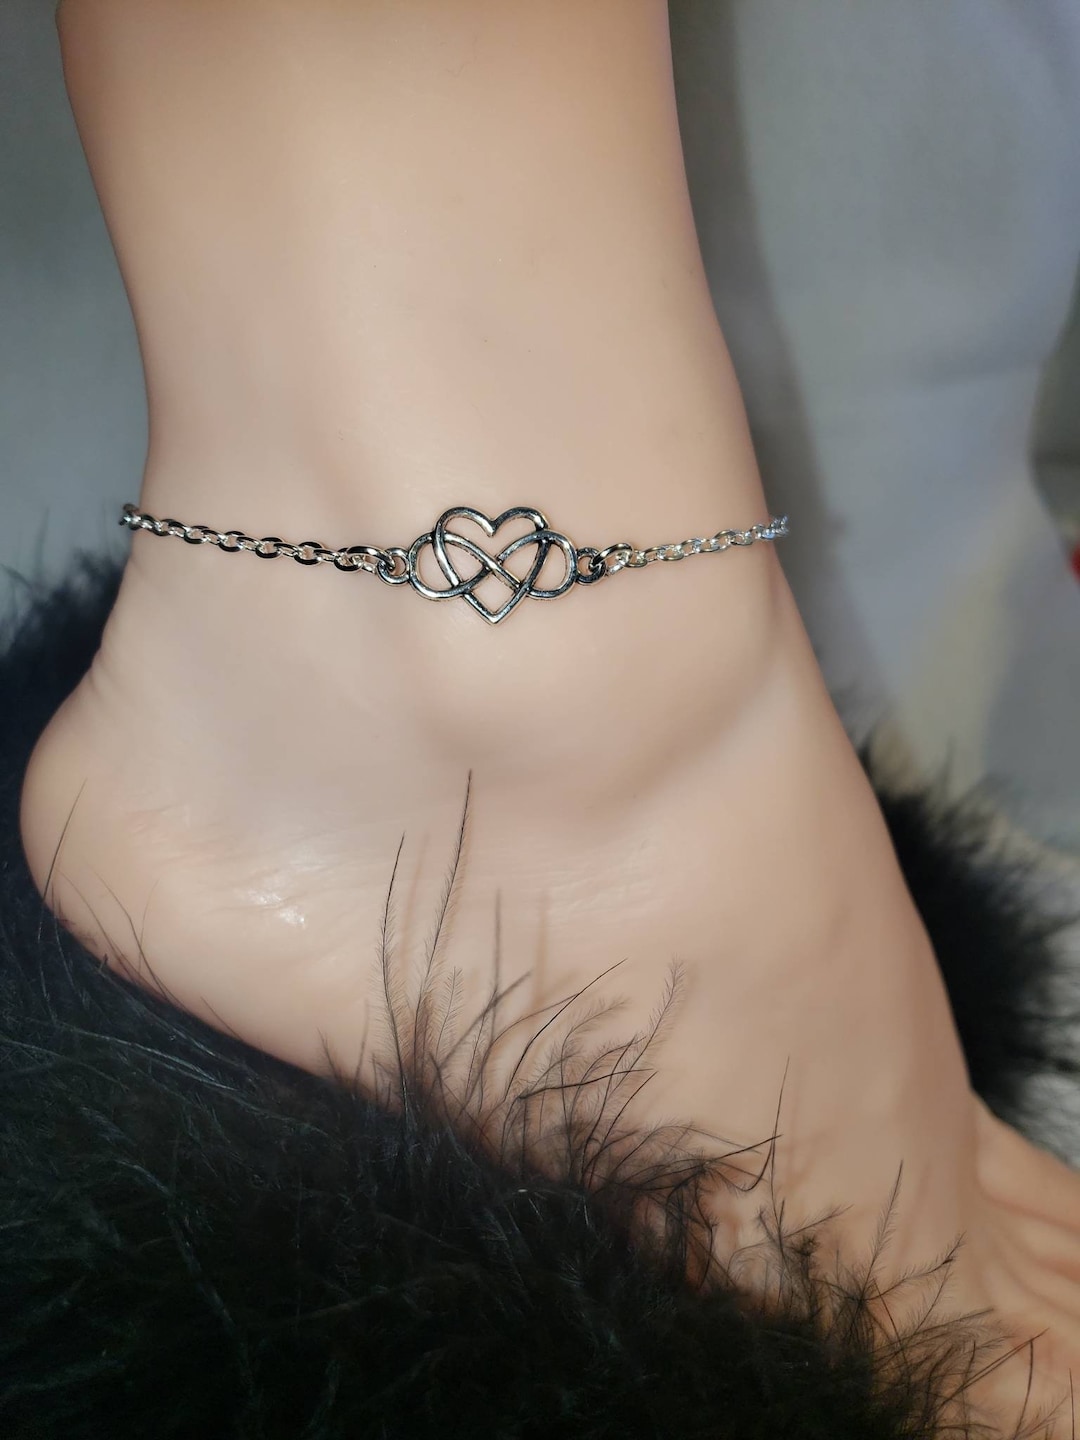 becky schwartz share hot wife ankle bracelet charms meaning photos